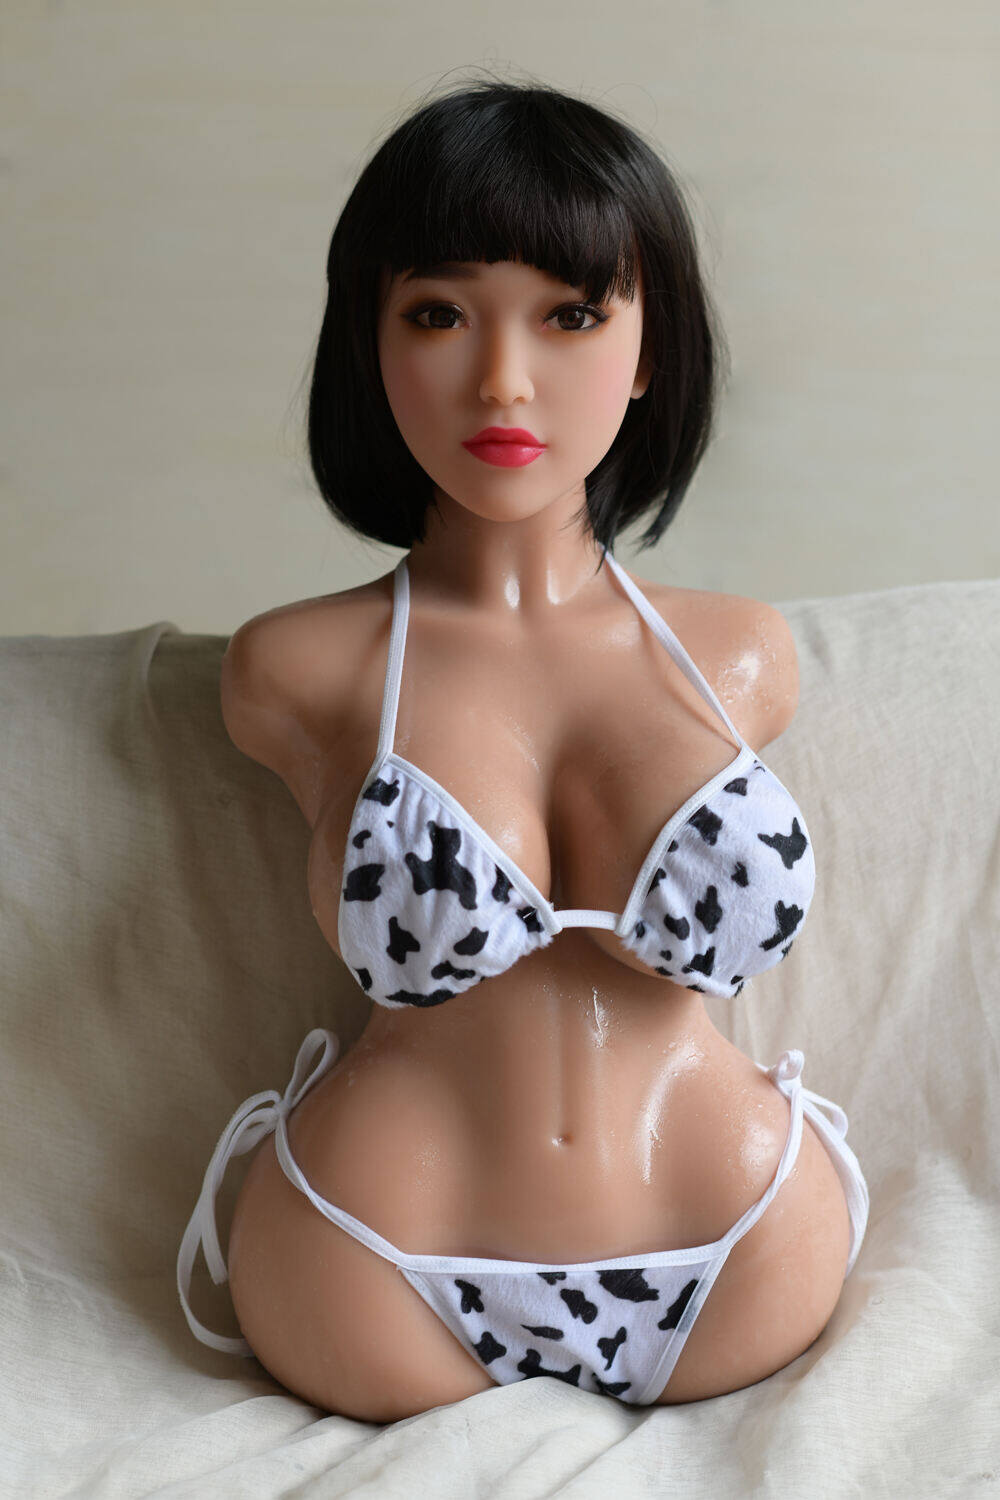 April 66cm(2ft2) G-Cup 6YE Premium Nice Buttocks TPE Sex Doll (US In Stock) image13